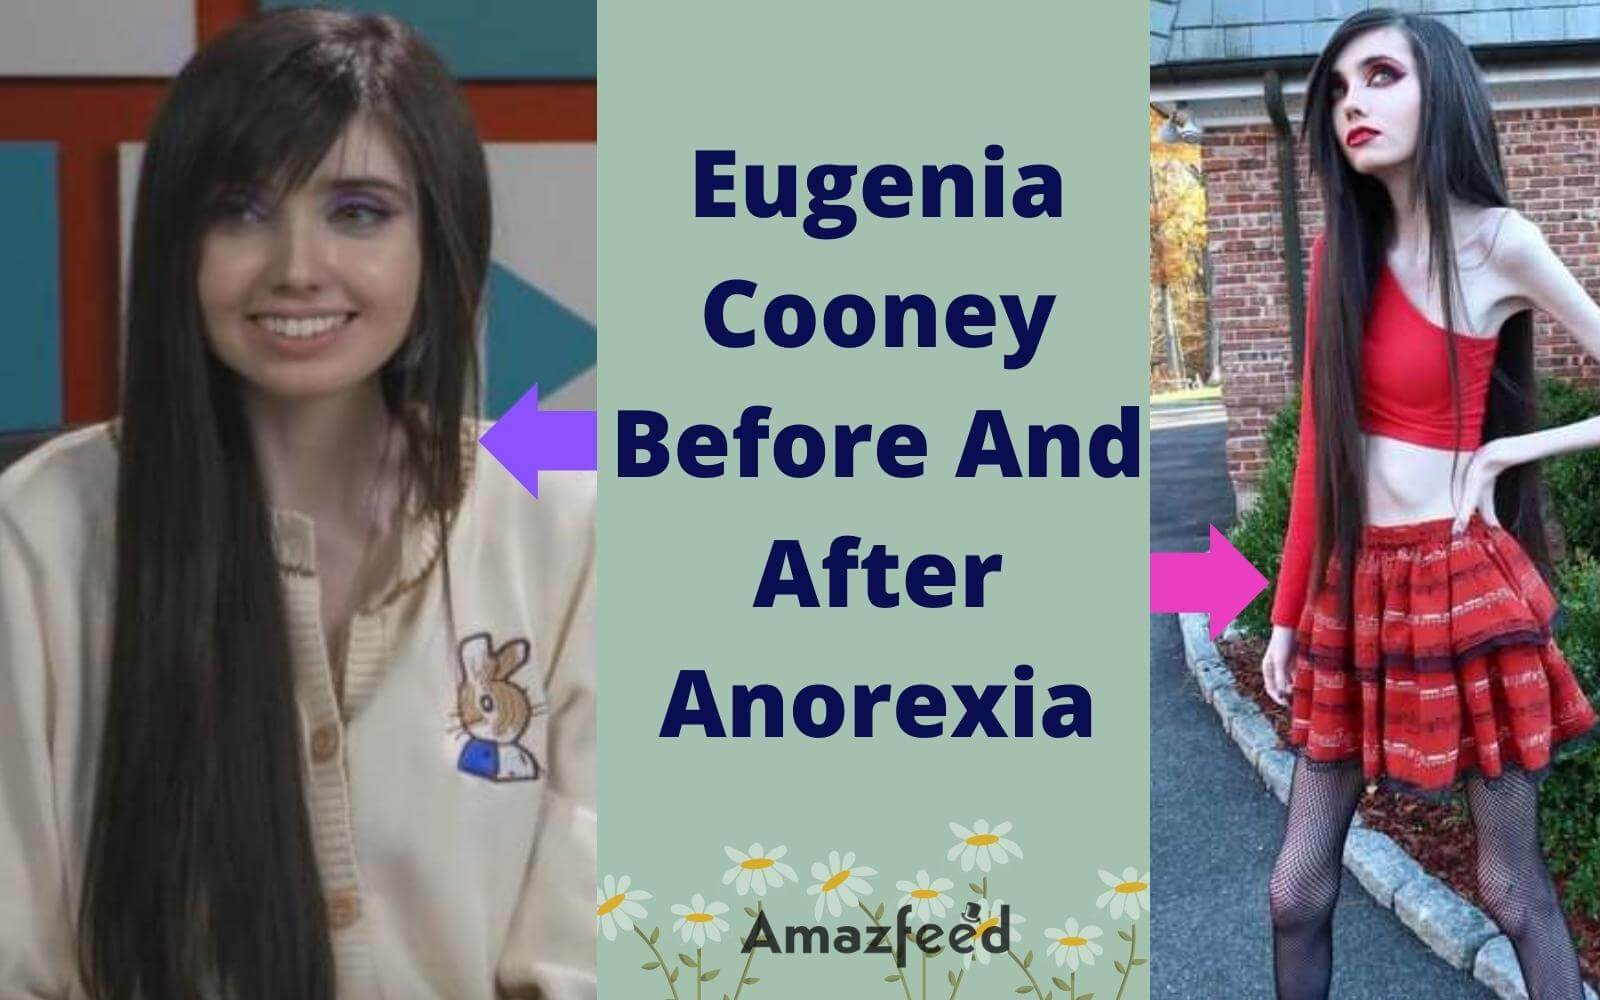 Eugenia Cooney Before And After Anorexia